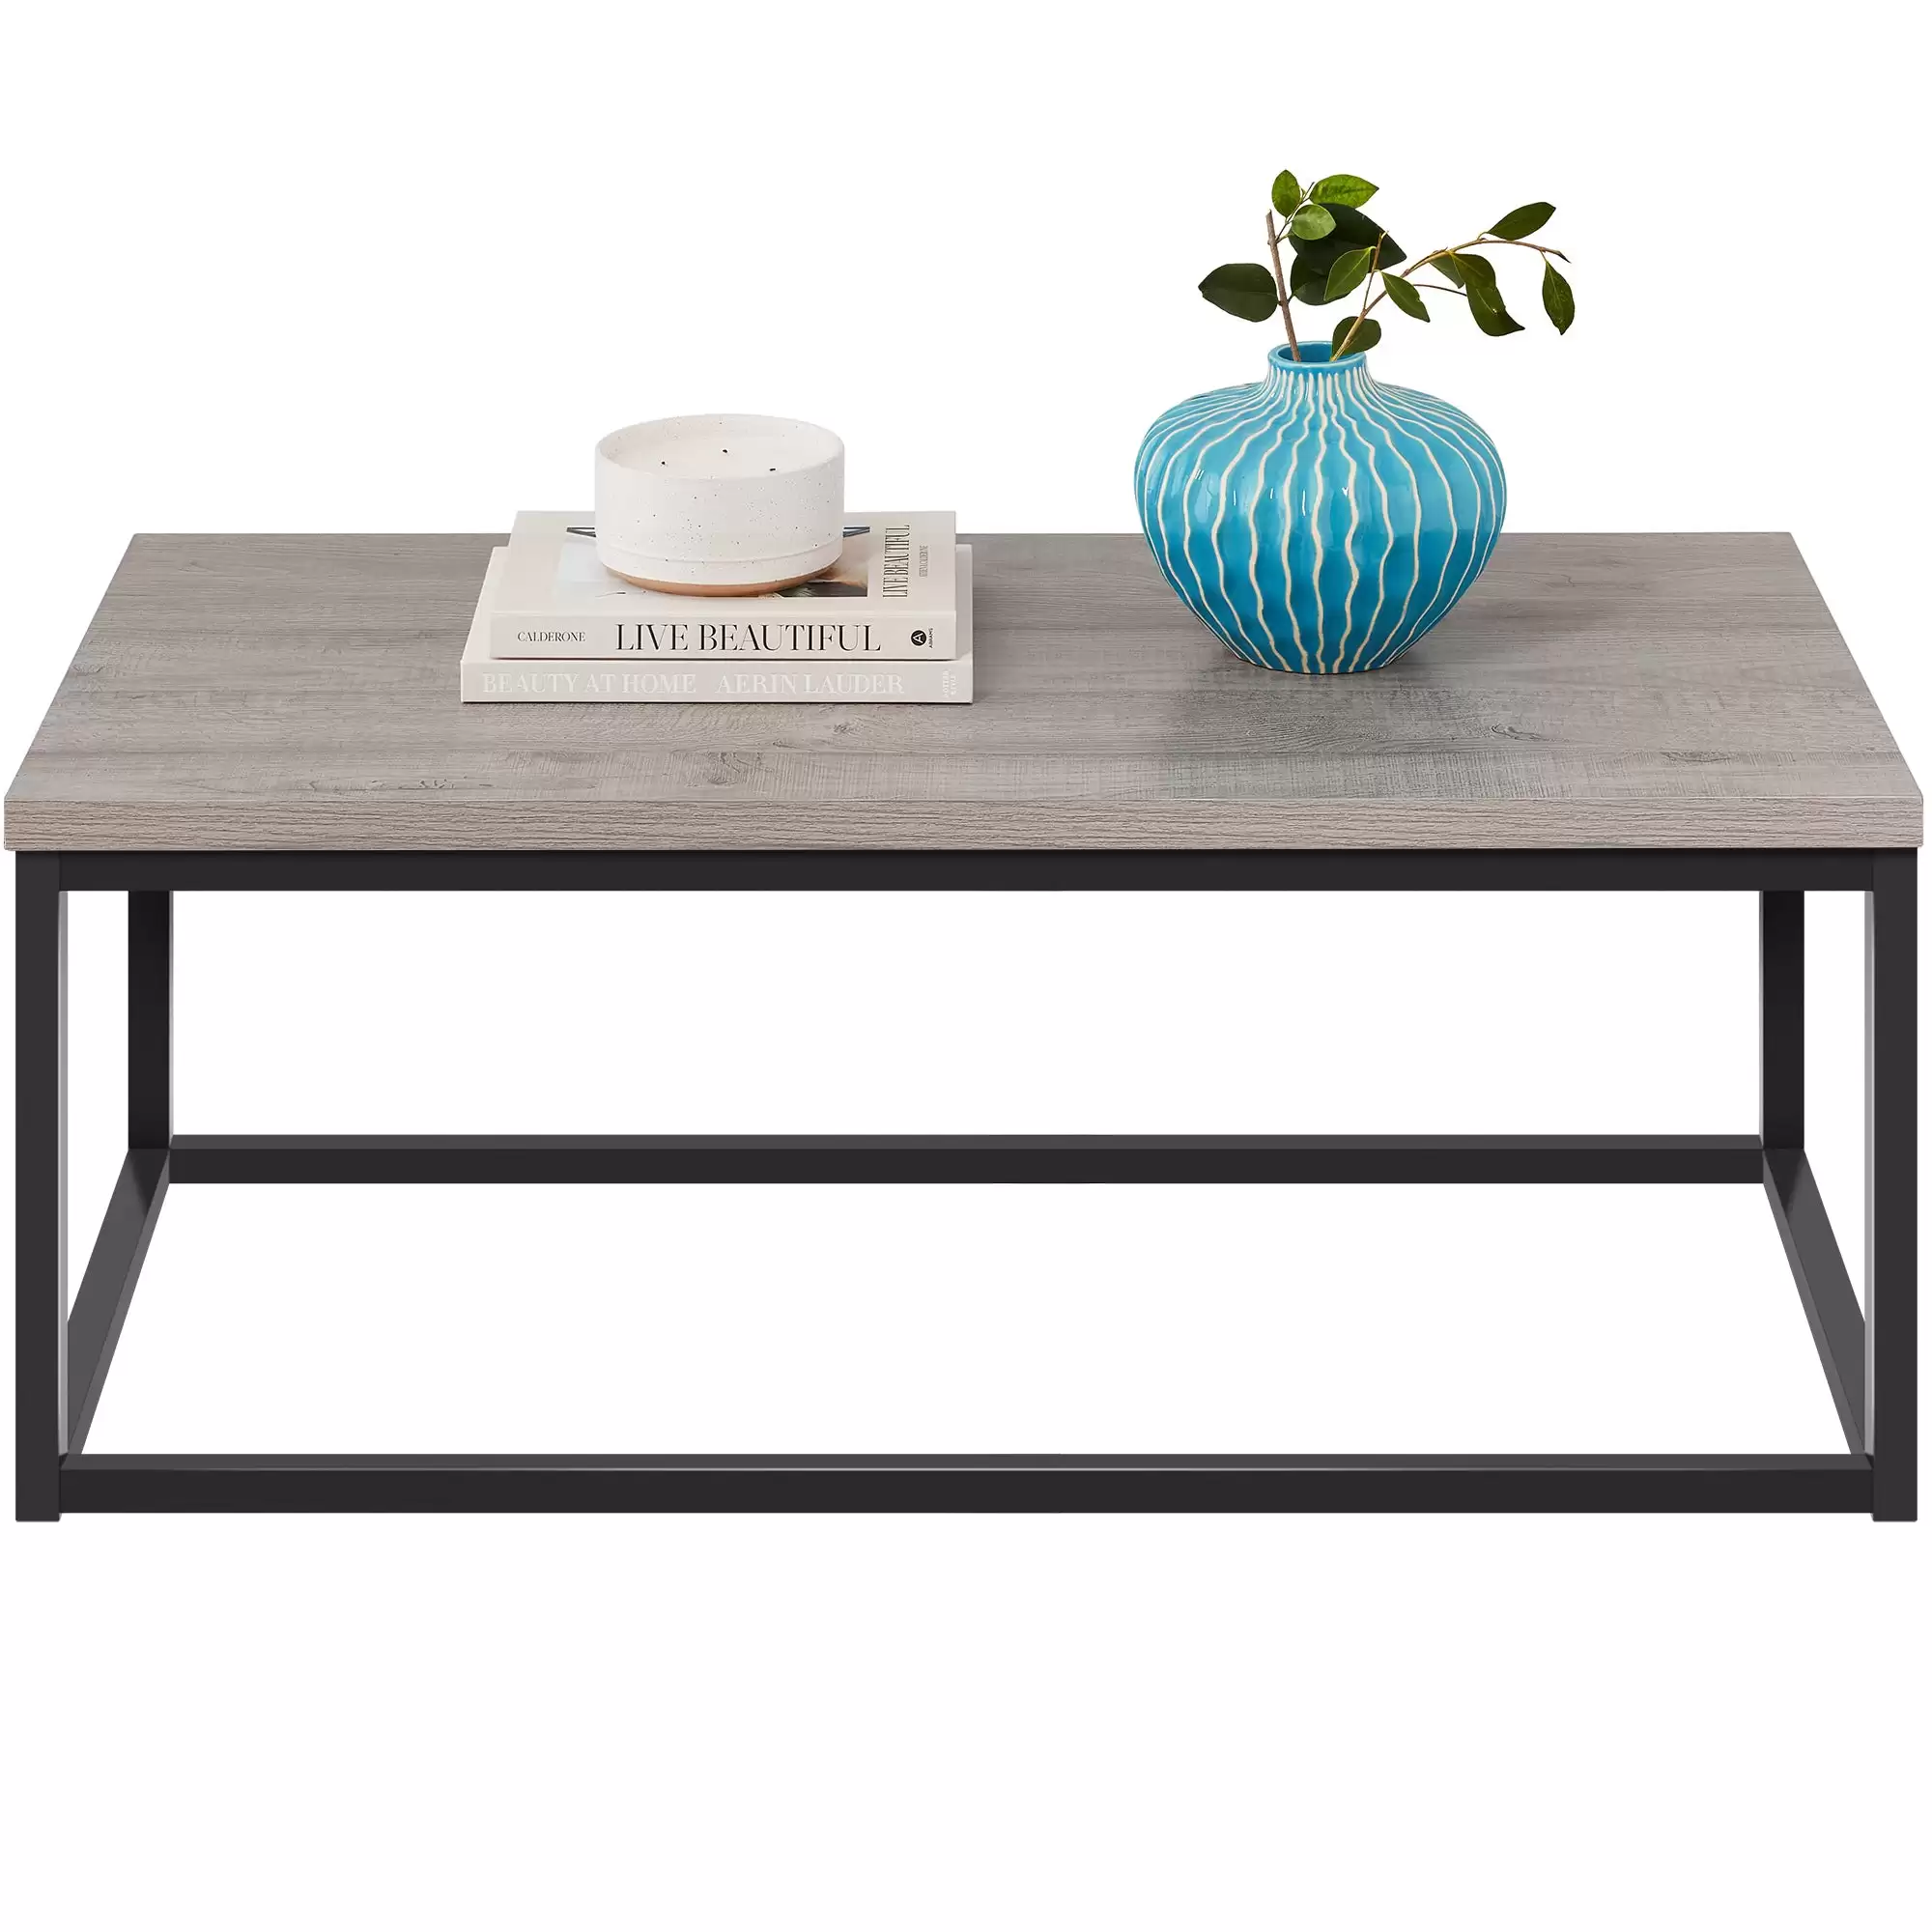 Pay Only $63.99 For 44in Modern Industrial Rectangular Wood Grain Coffee Table W/ Metal Frame With This Discount Coupon At Bestchoiceproducts